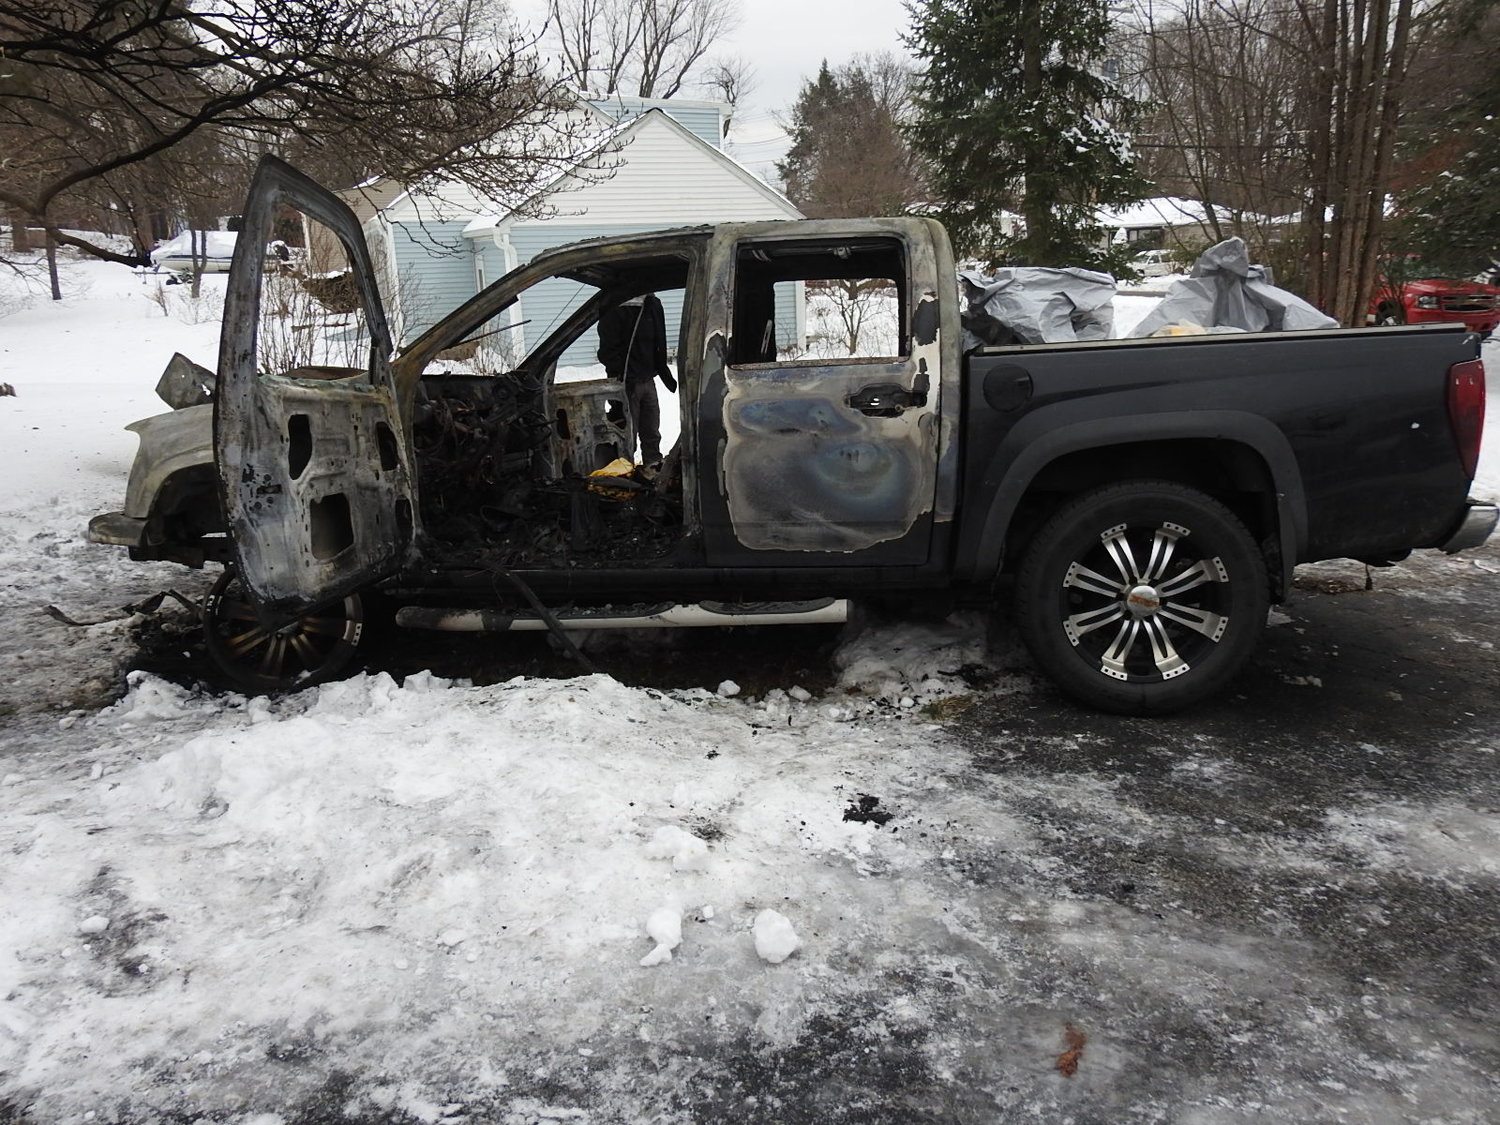 Good Will FD responded to truck fire on Gidney Ave in a driveway..After they extinguished  the fire they discovered a male subject inside the truck,